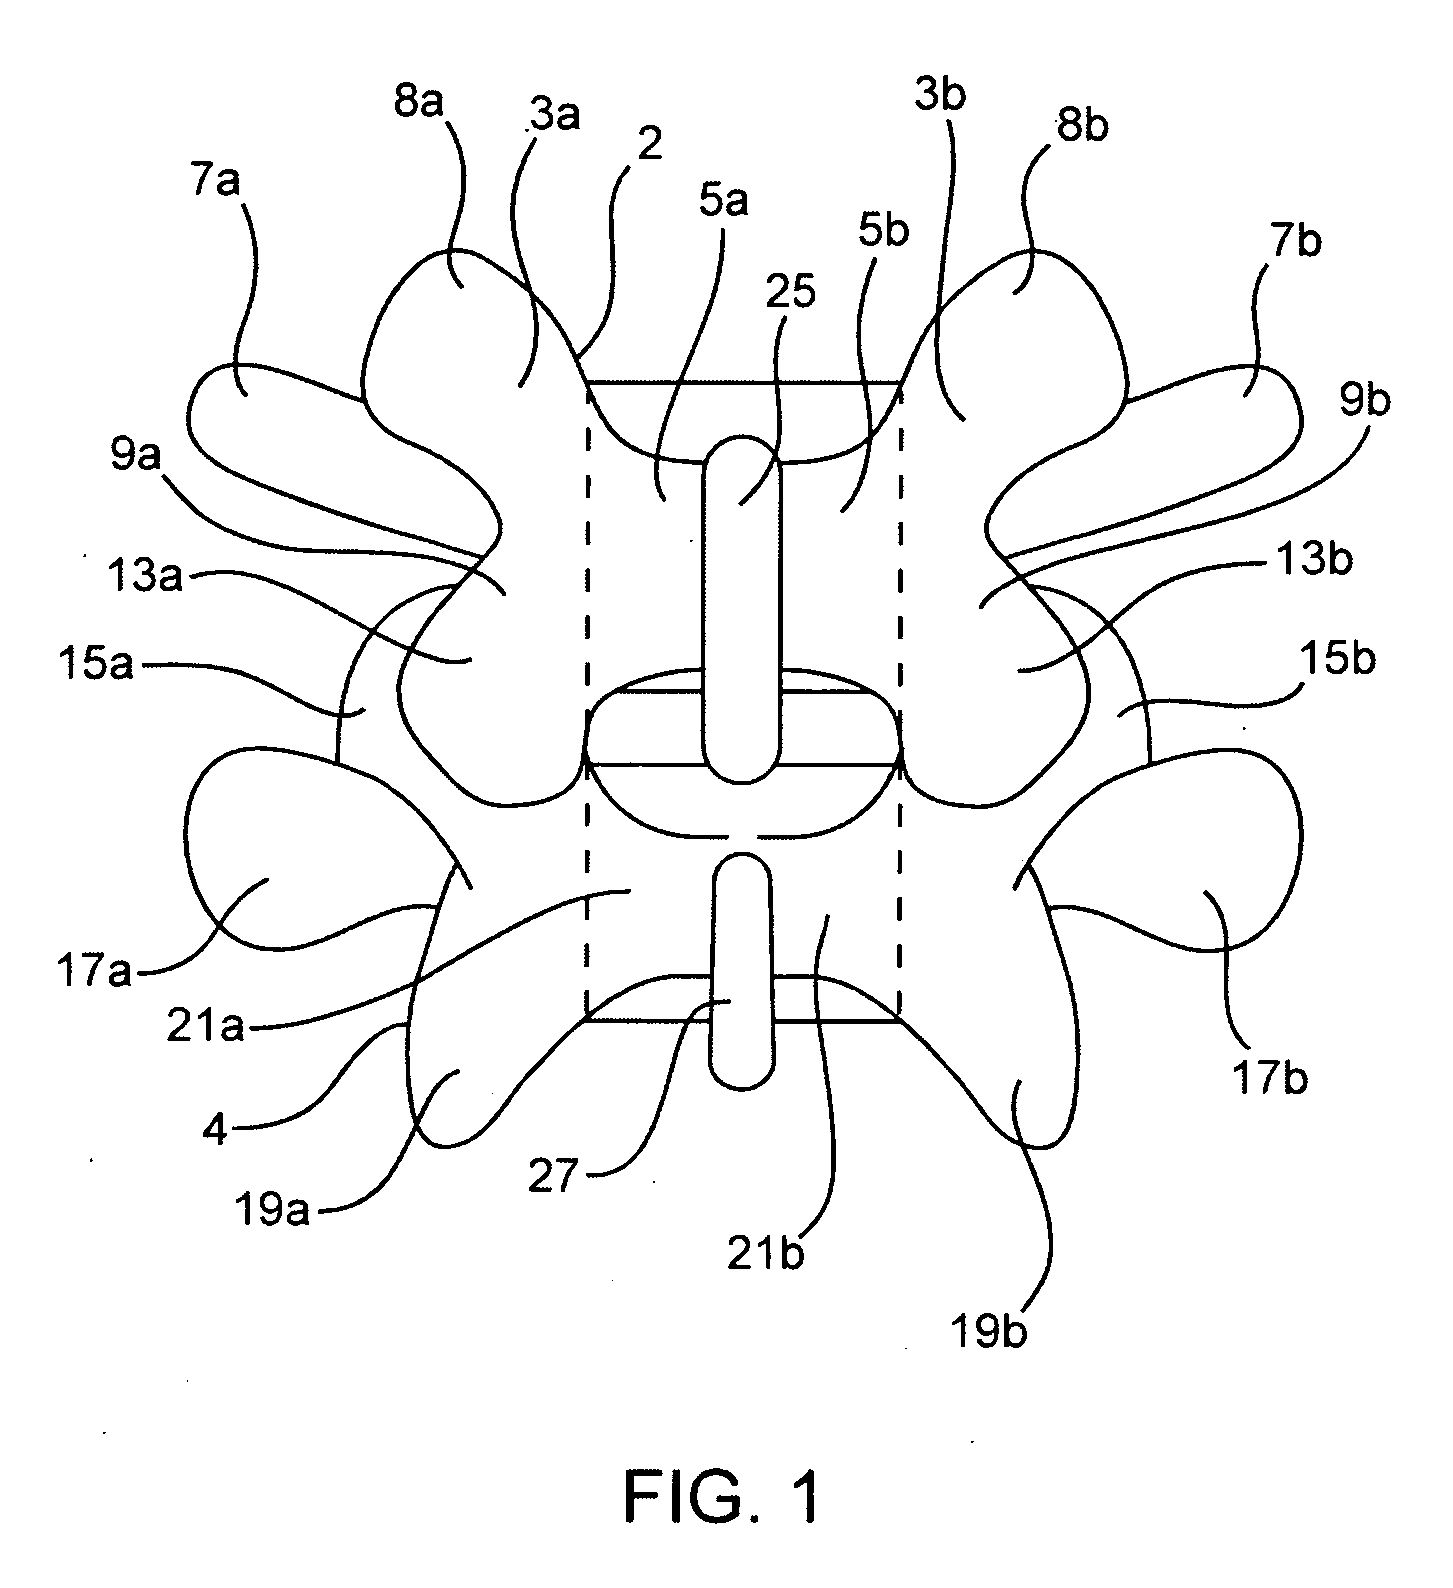 Systems and methods for posterior dynamic stabilization of the spine